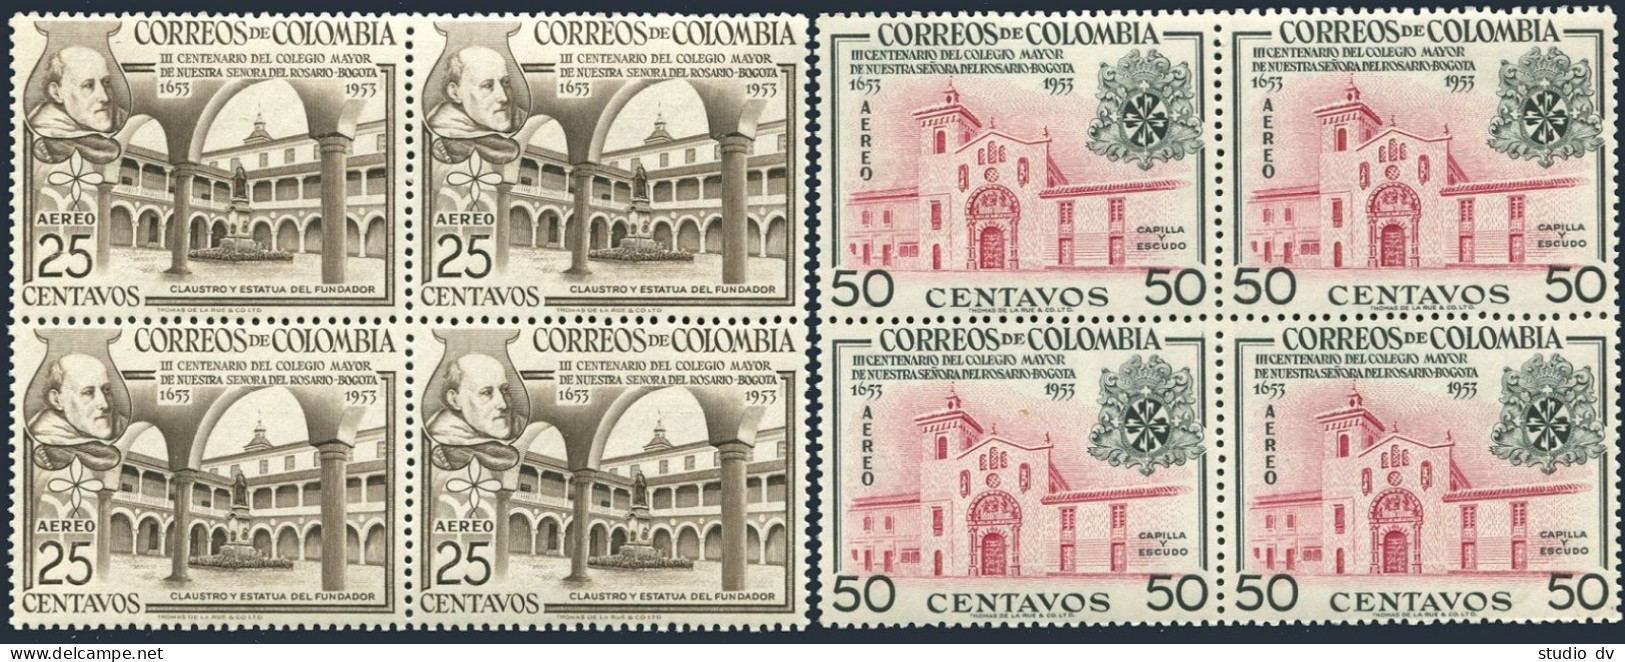 Colombia C265-C266 Blocks/4,MNH.Mi 711-712. Senior College Of Our Lady.1954. - Colombie